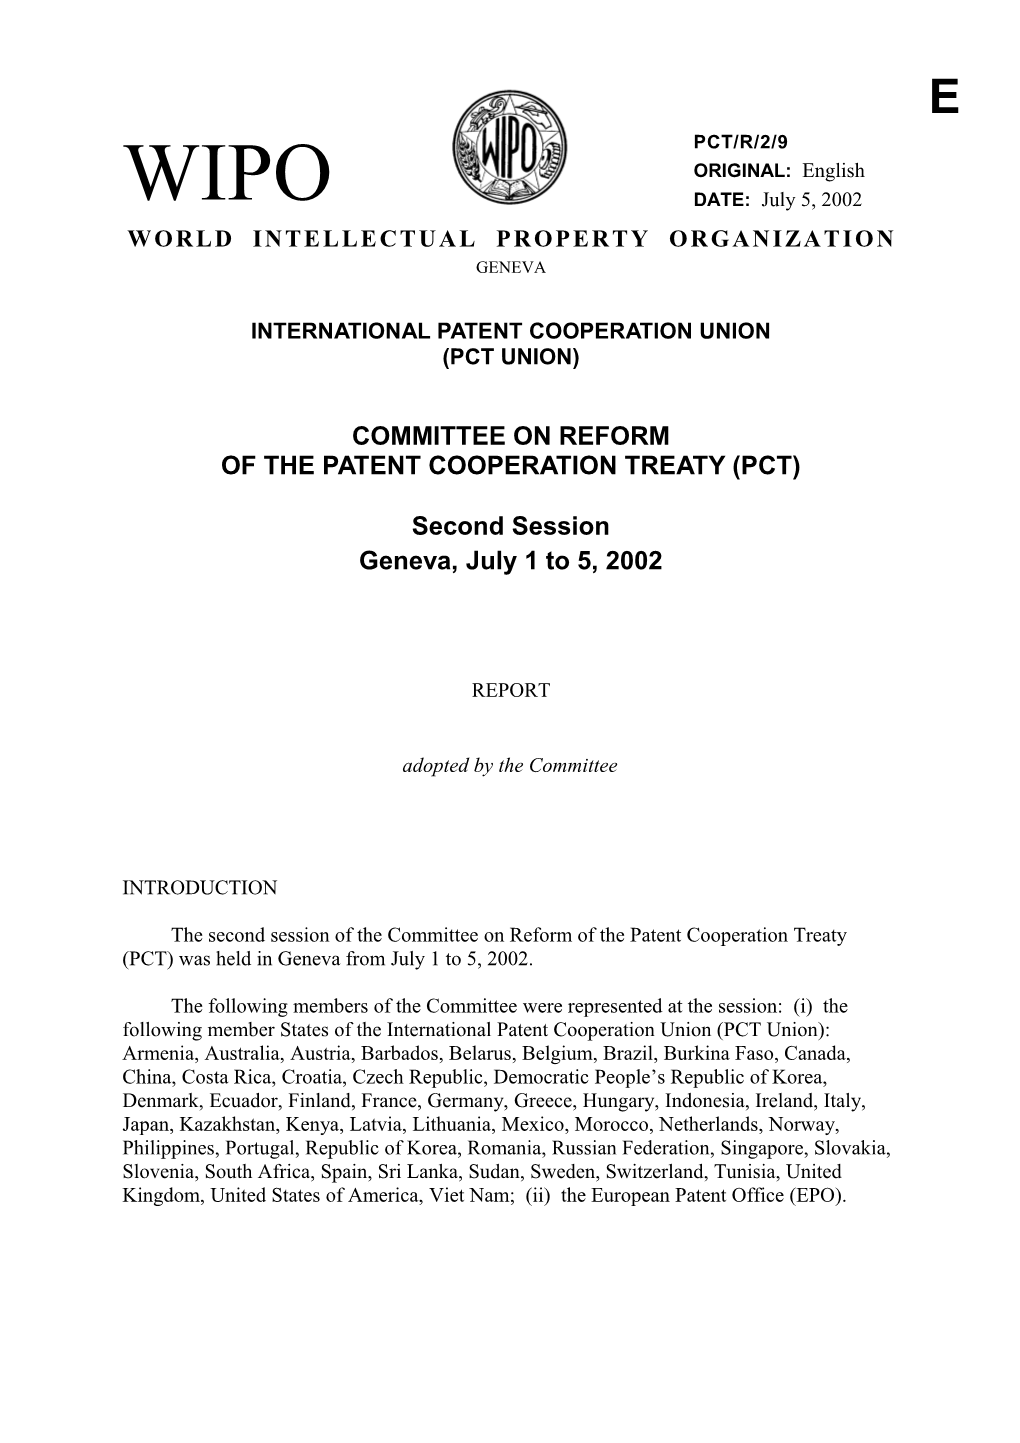 Committee on Reform of the Patent Cooperation Treaty (PCT)